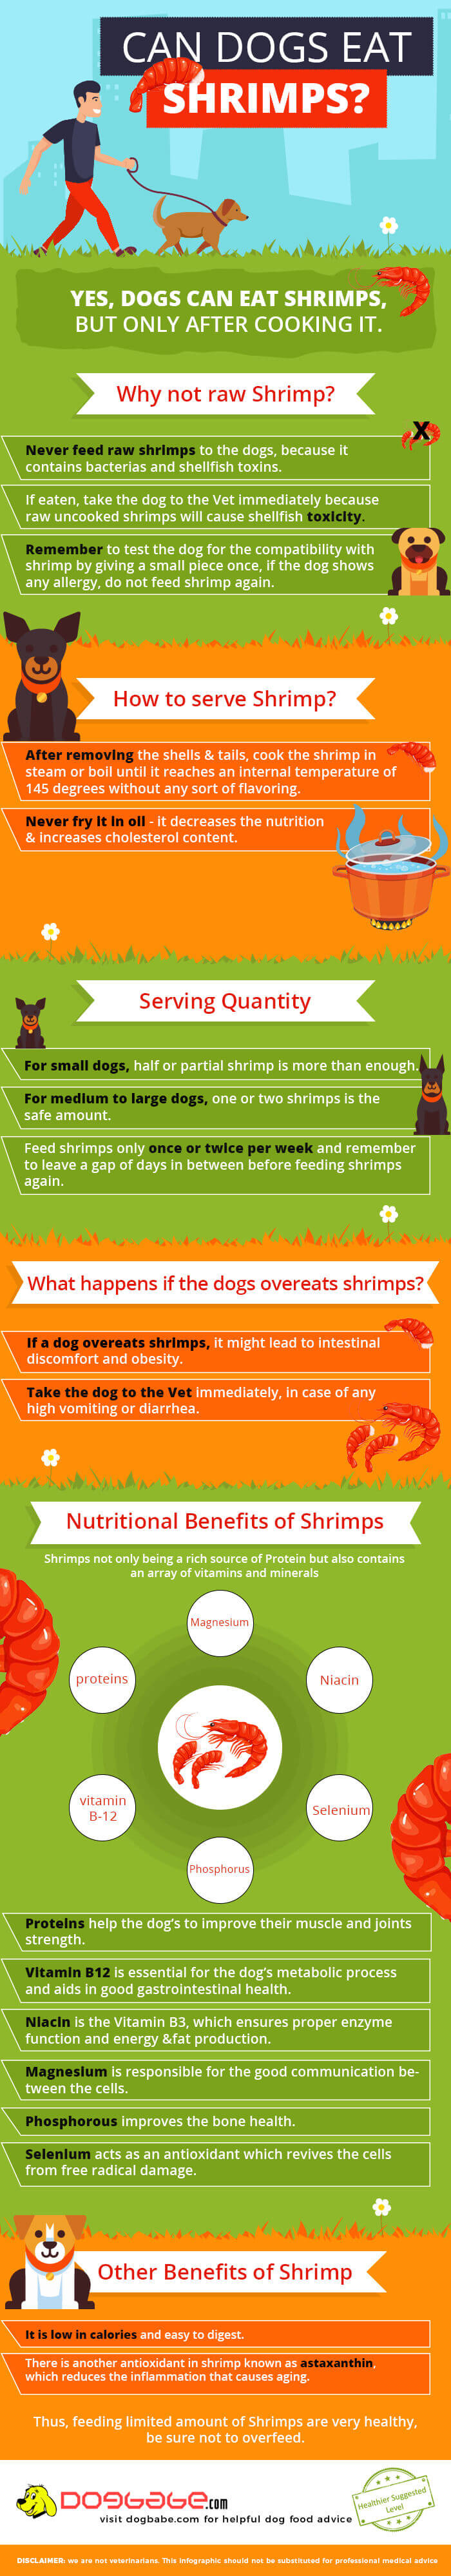 Can dogs eat shrimp infographic